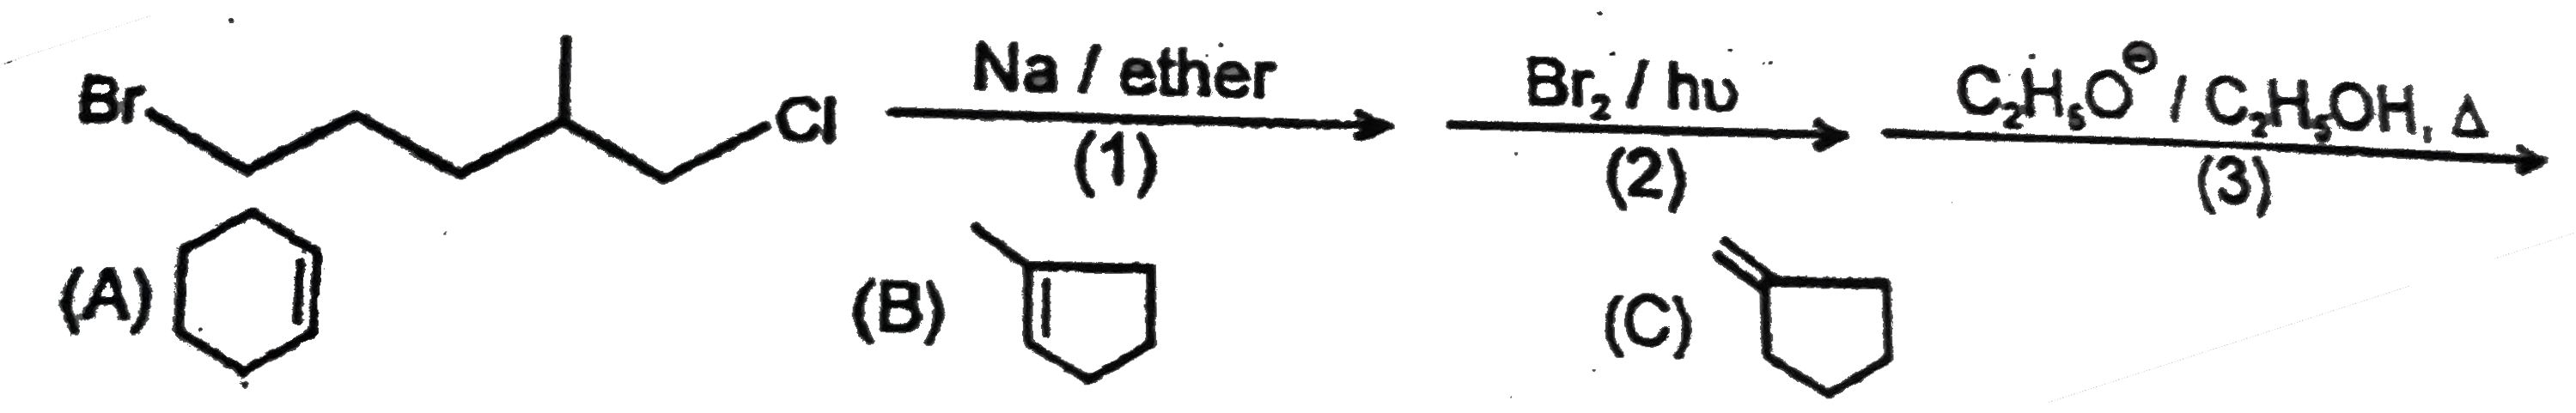 The major product of the following product of the following reaction is :      underset((1))overset(Na//ether)tounderset((2))overset(Br2//hv)tounderset((3))overset(C2H5O^(Theta)//C2H5OHDelta)to